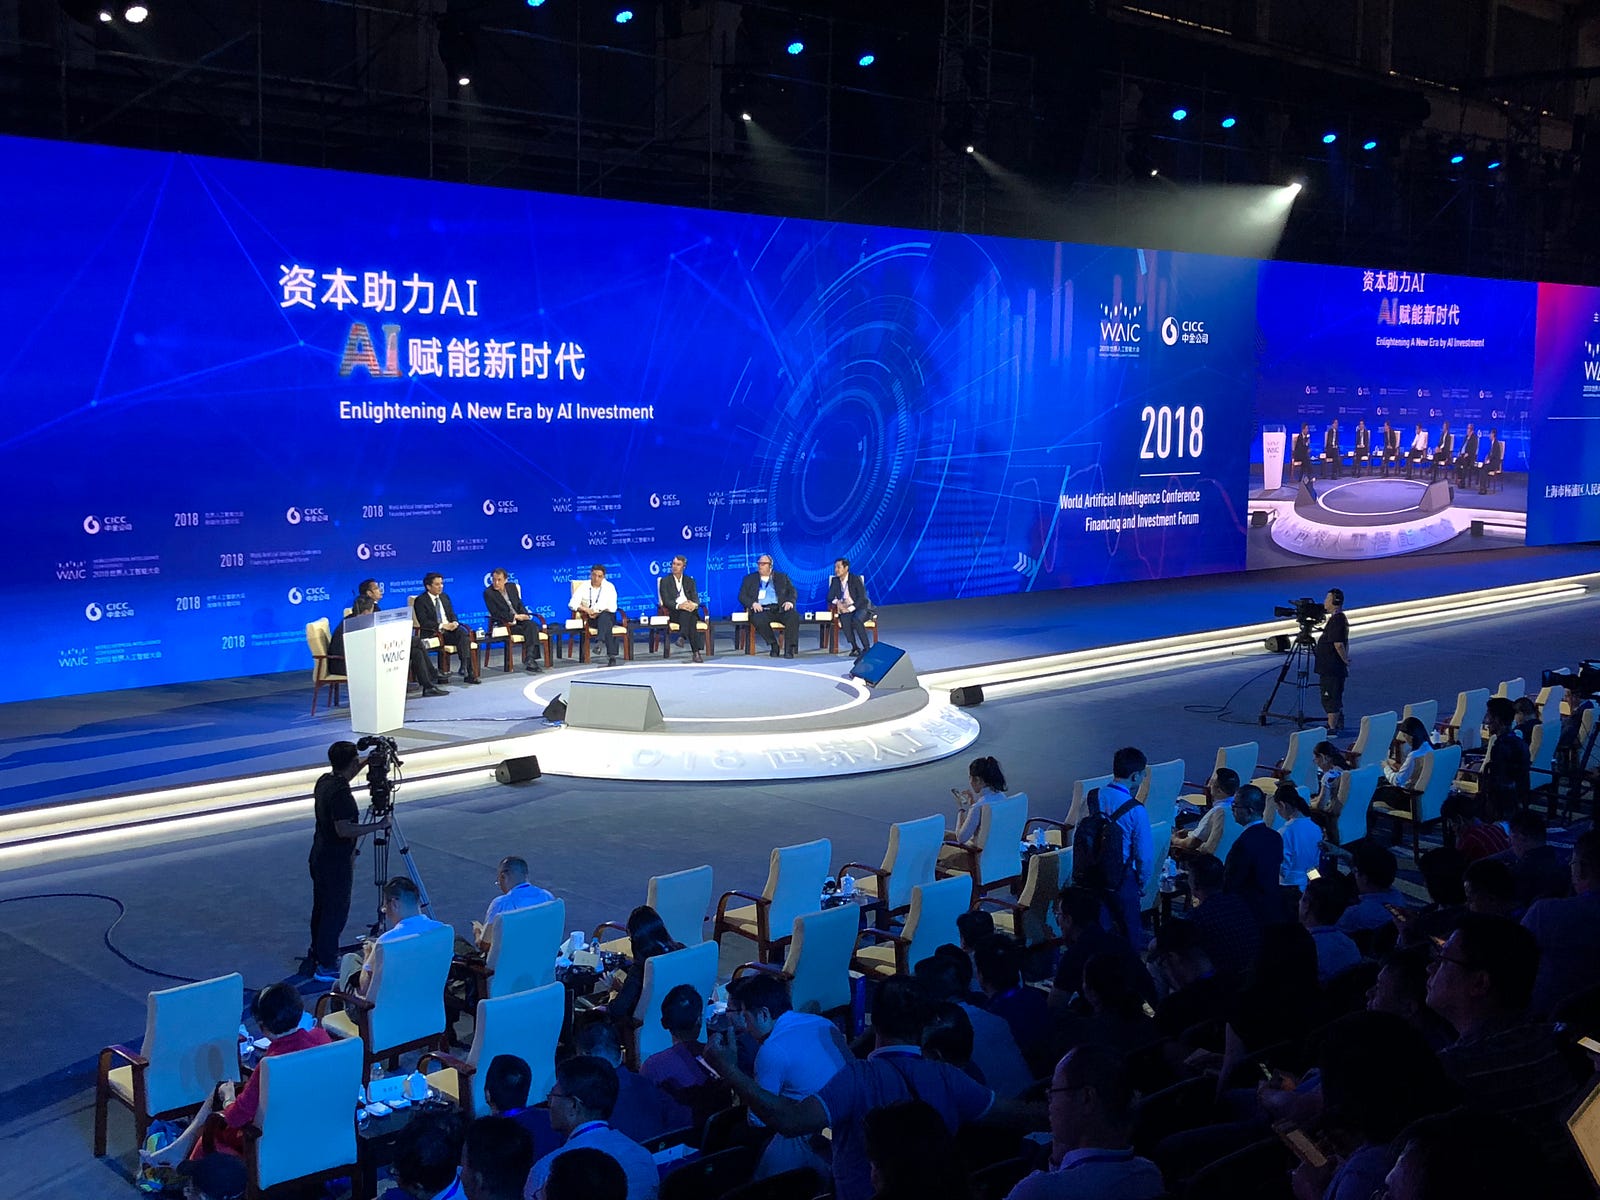 An Inside Look at the Cool Tech at the Shanghai World AI Conference